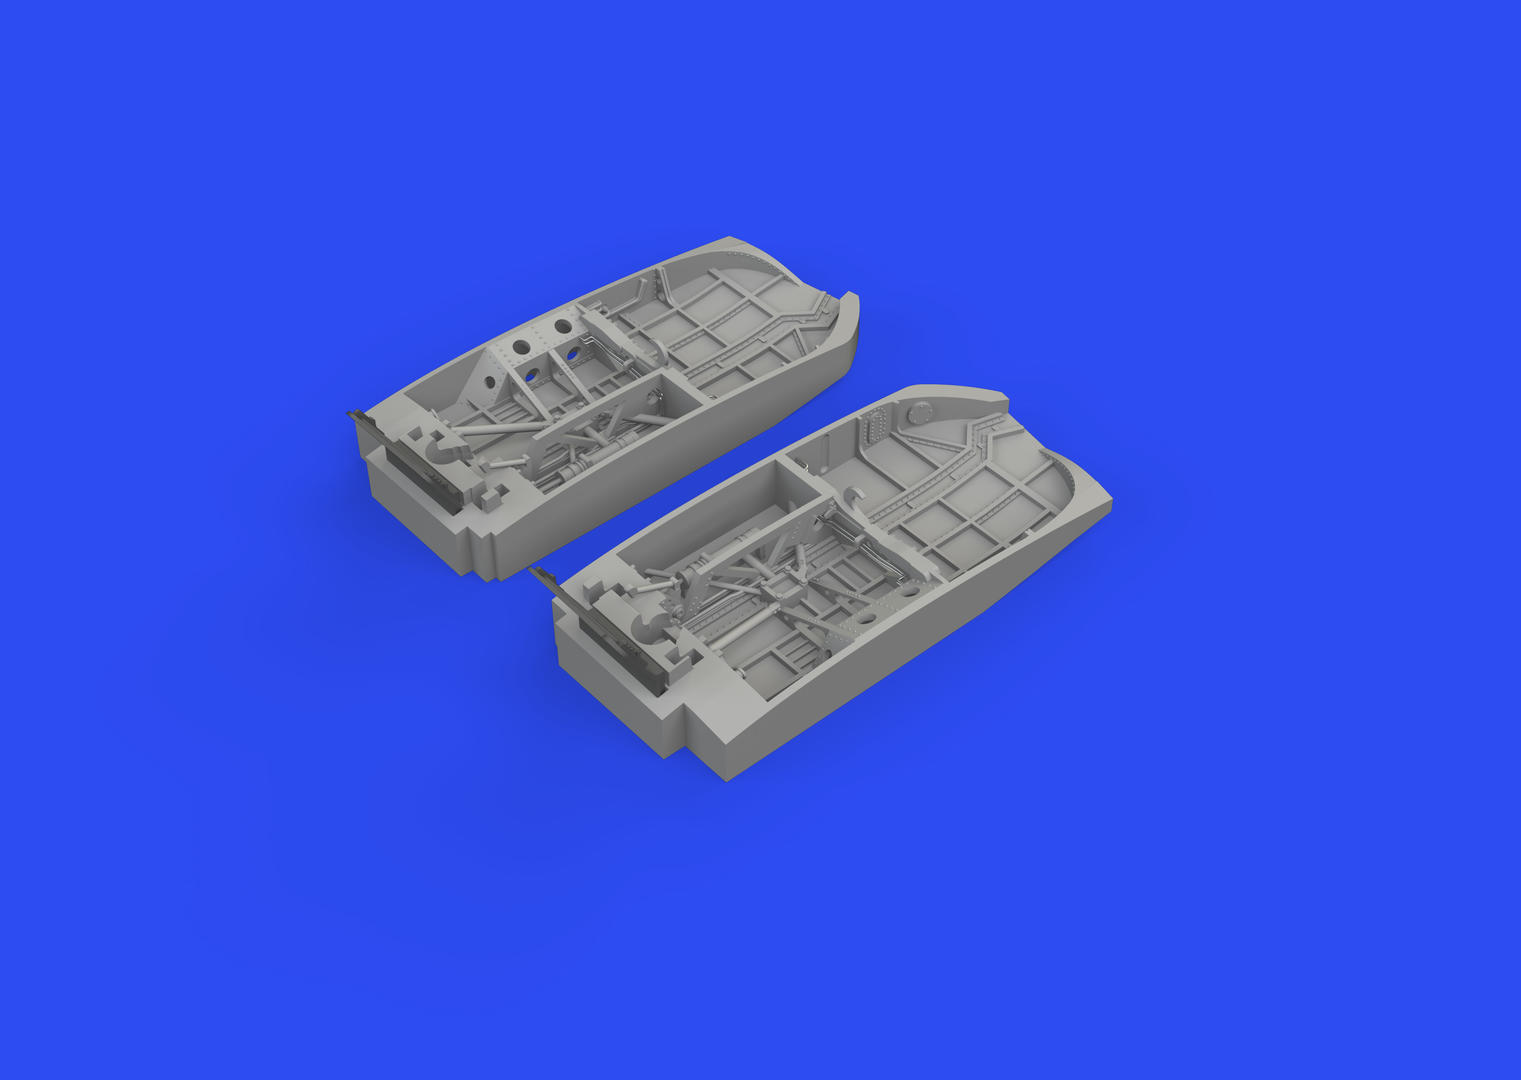 Additions (3D resin printing) 1/48  Grumman F6F Hellcat wheel bays 3D-Printed (designed to be used with Eduard kits) 